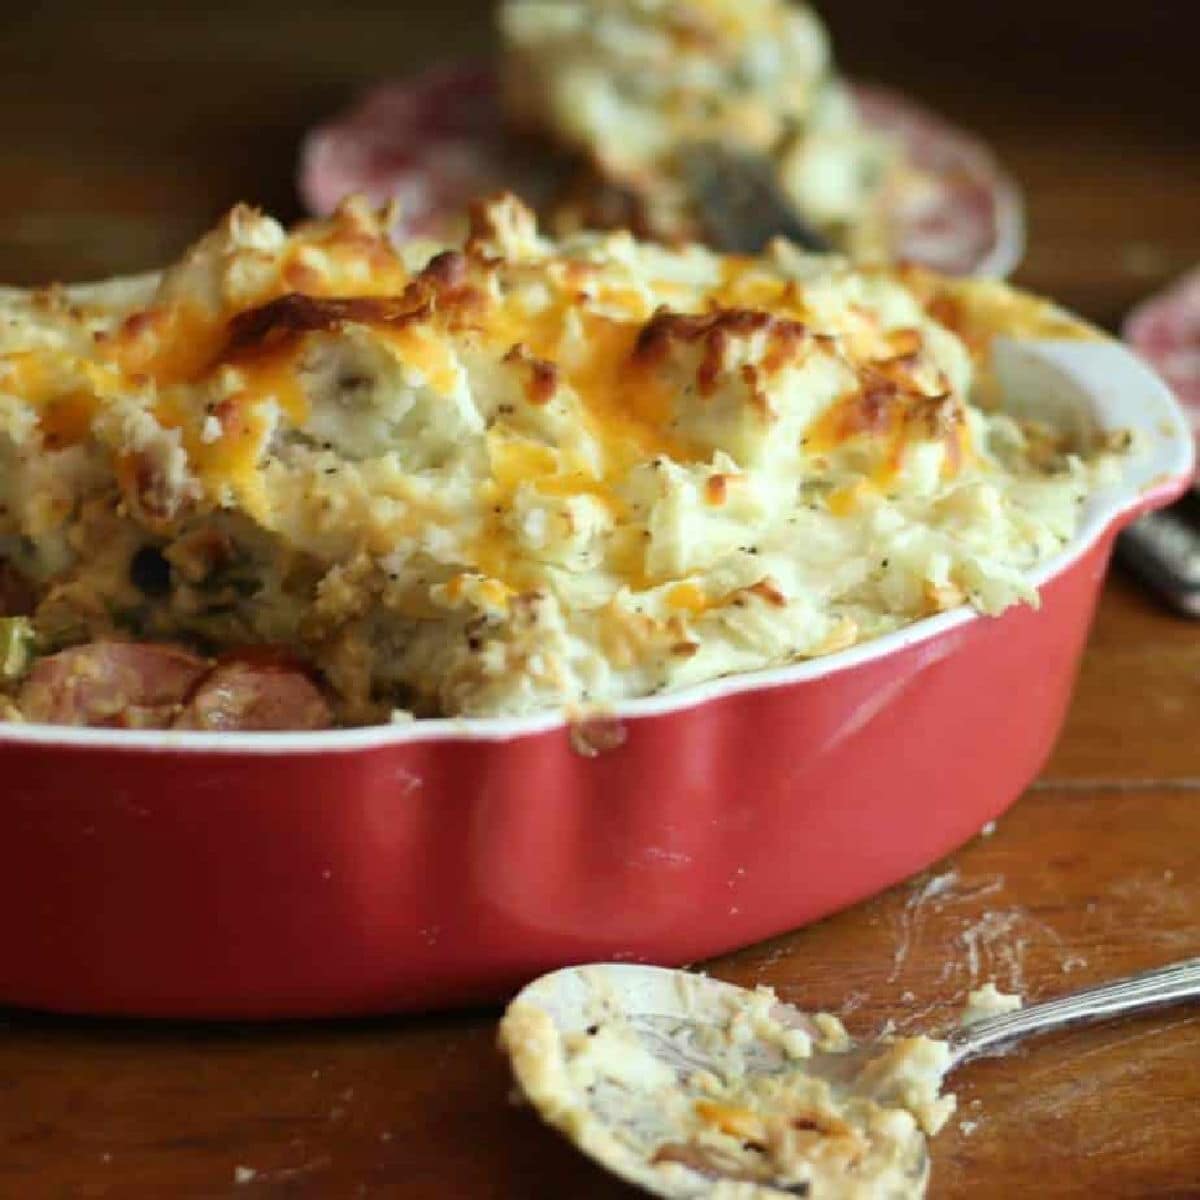 A casserole dish with baked smoked sausage shepherd's pie in it.